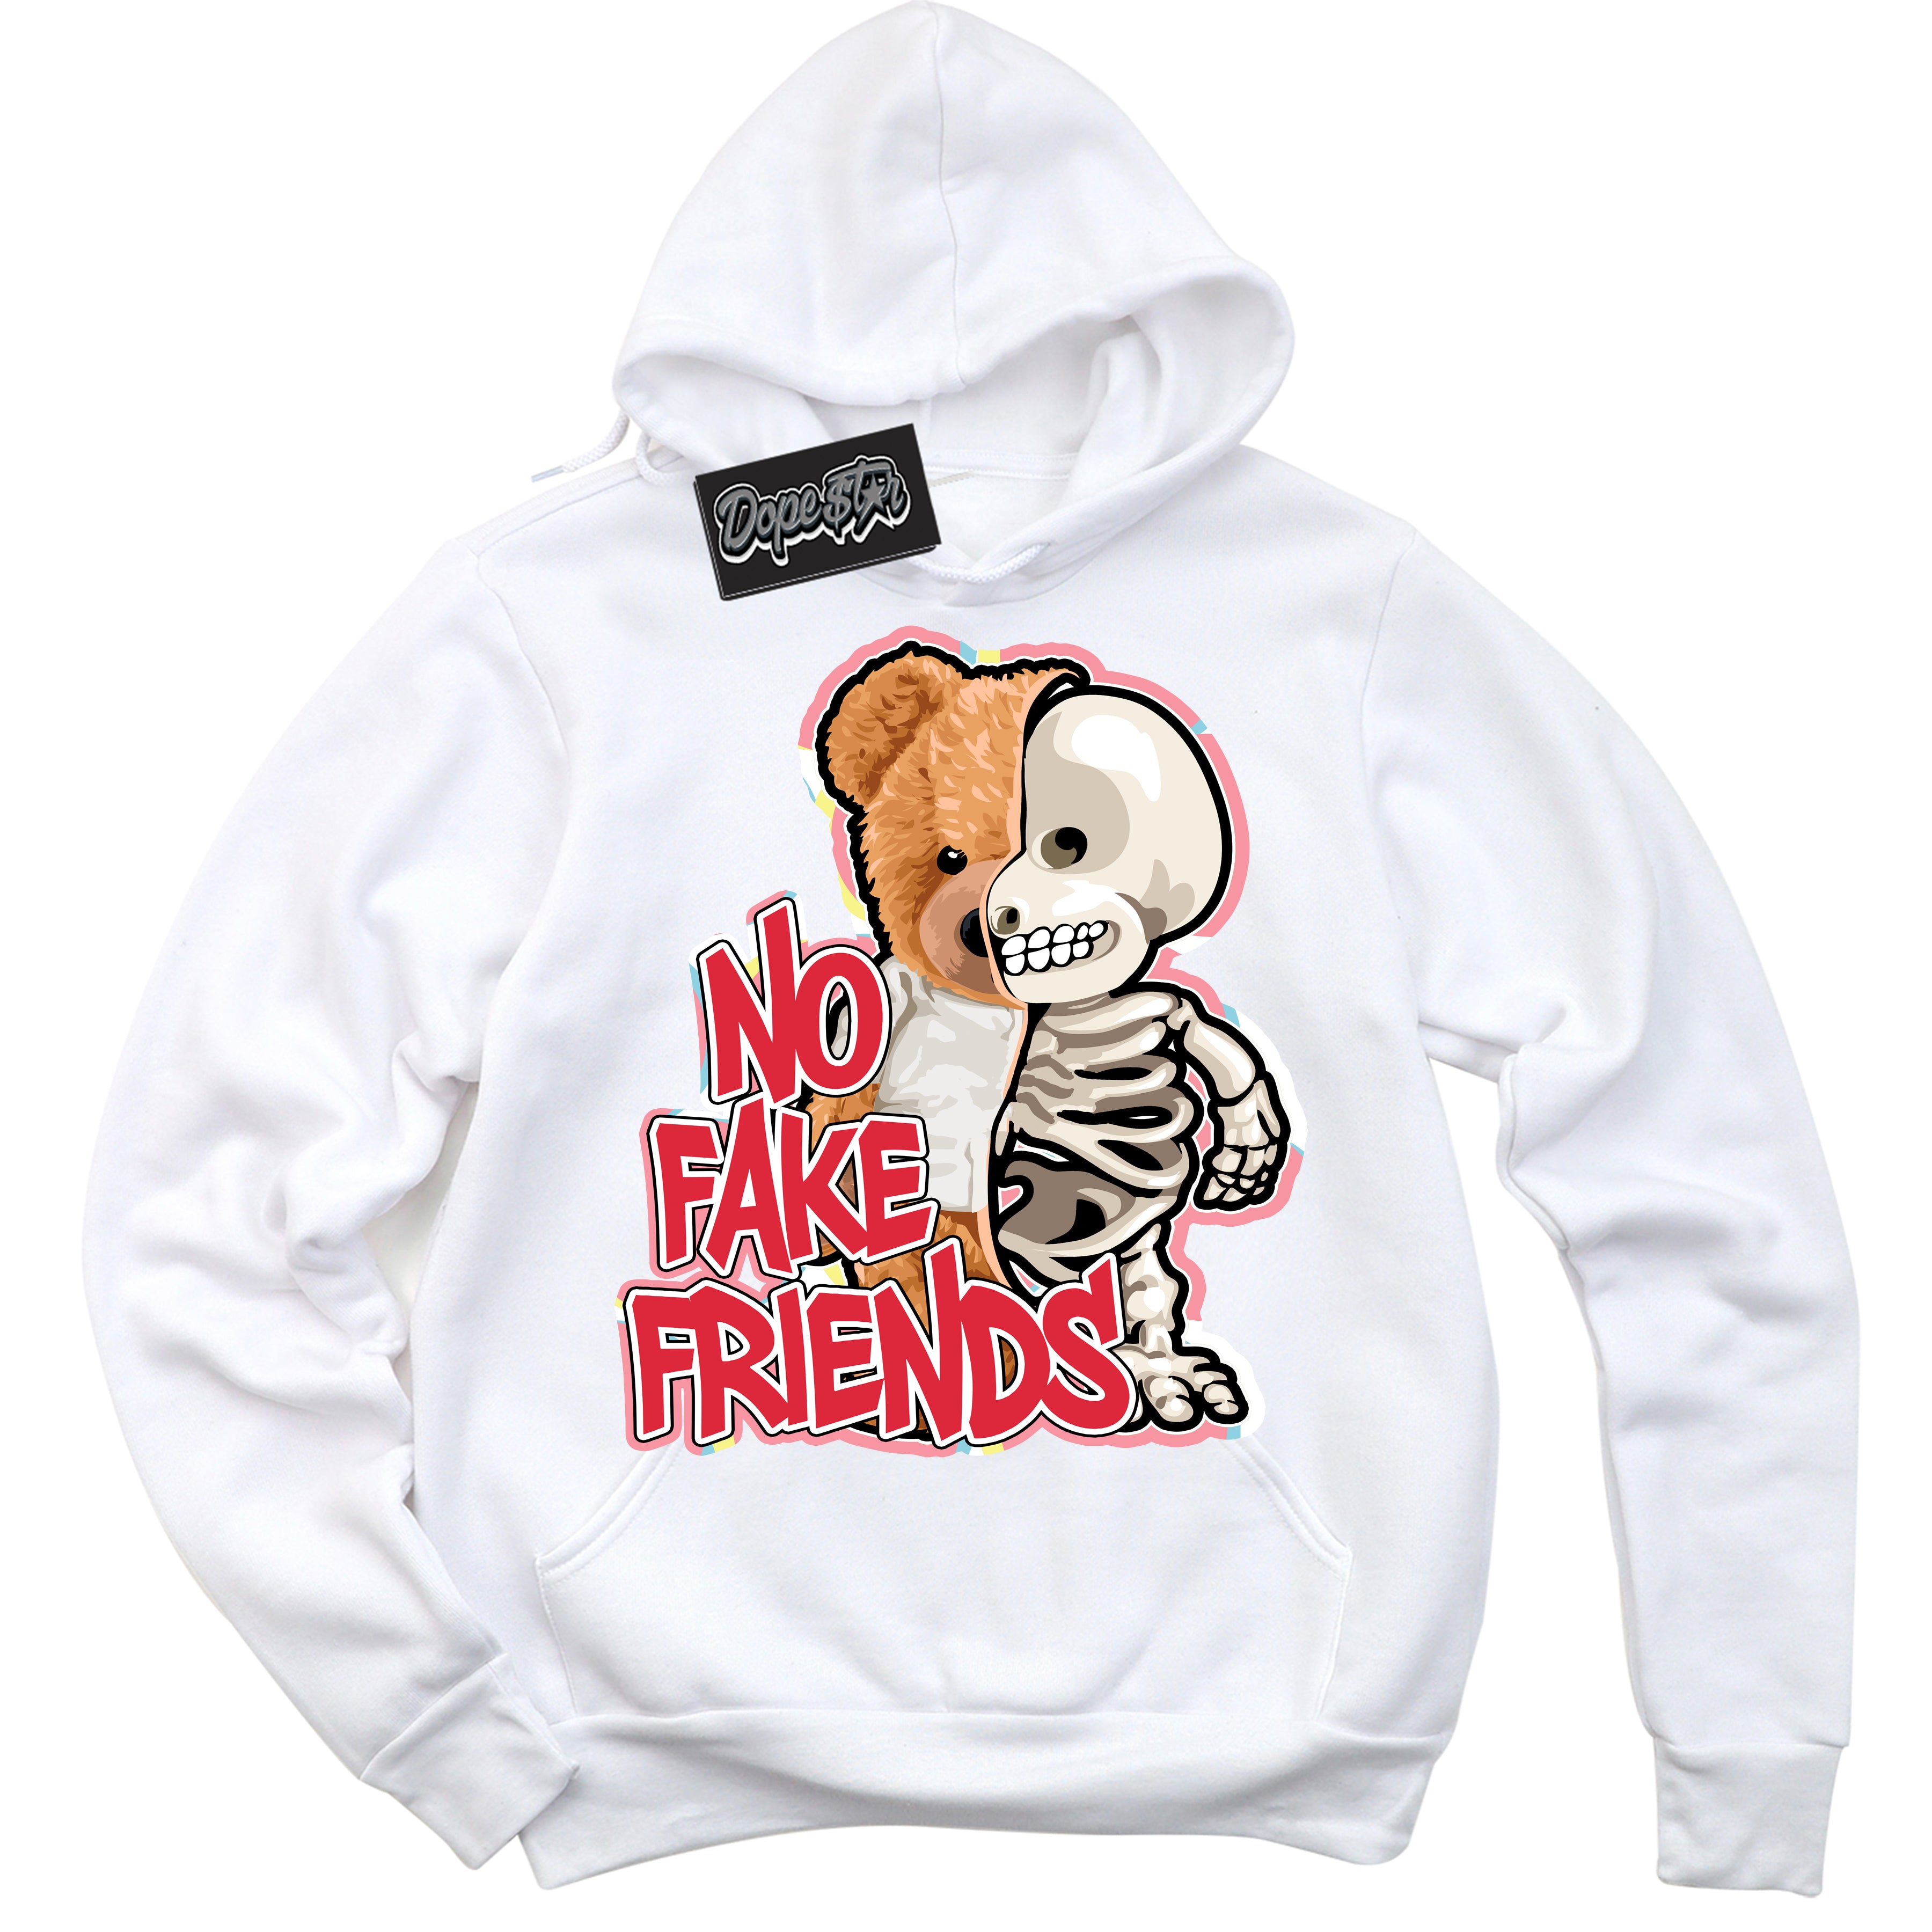 Cool White Graphic DopeStar Hoodie with “ No Fake Friends “ print, that perfectly matches Spider-Verse 1s sneakers